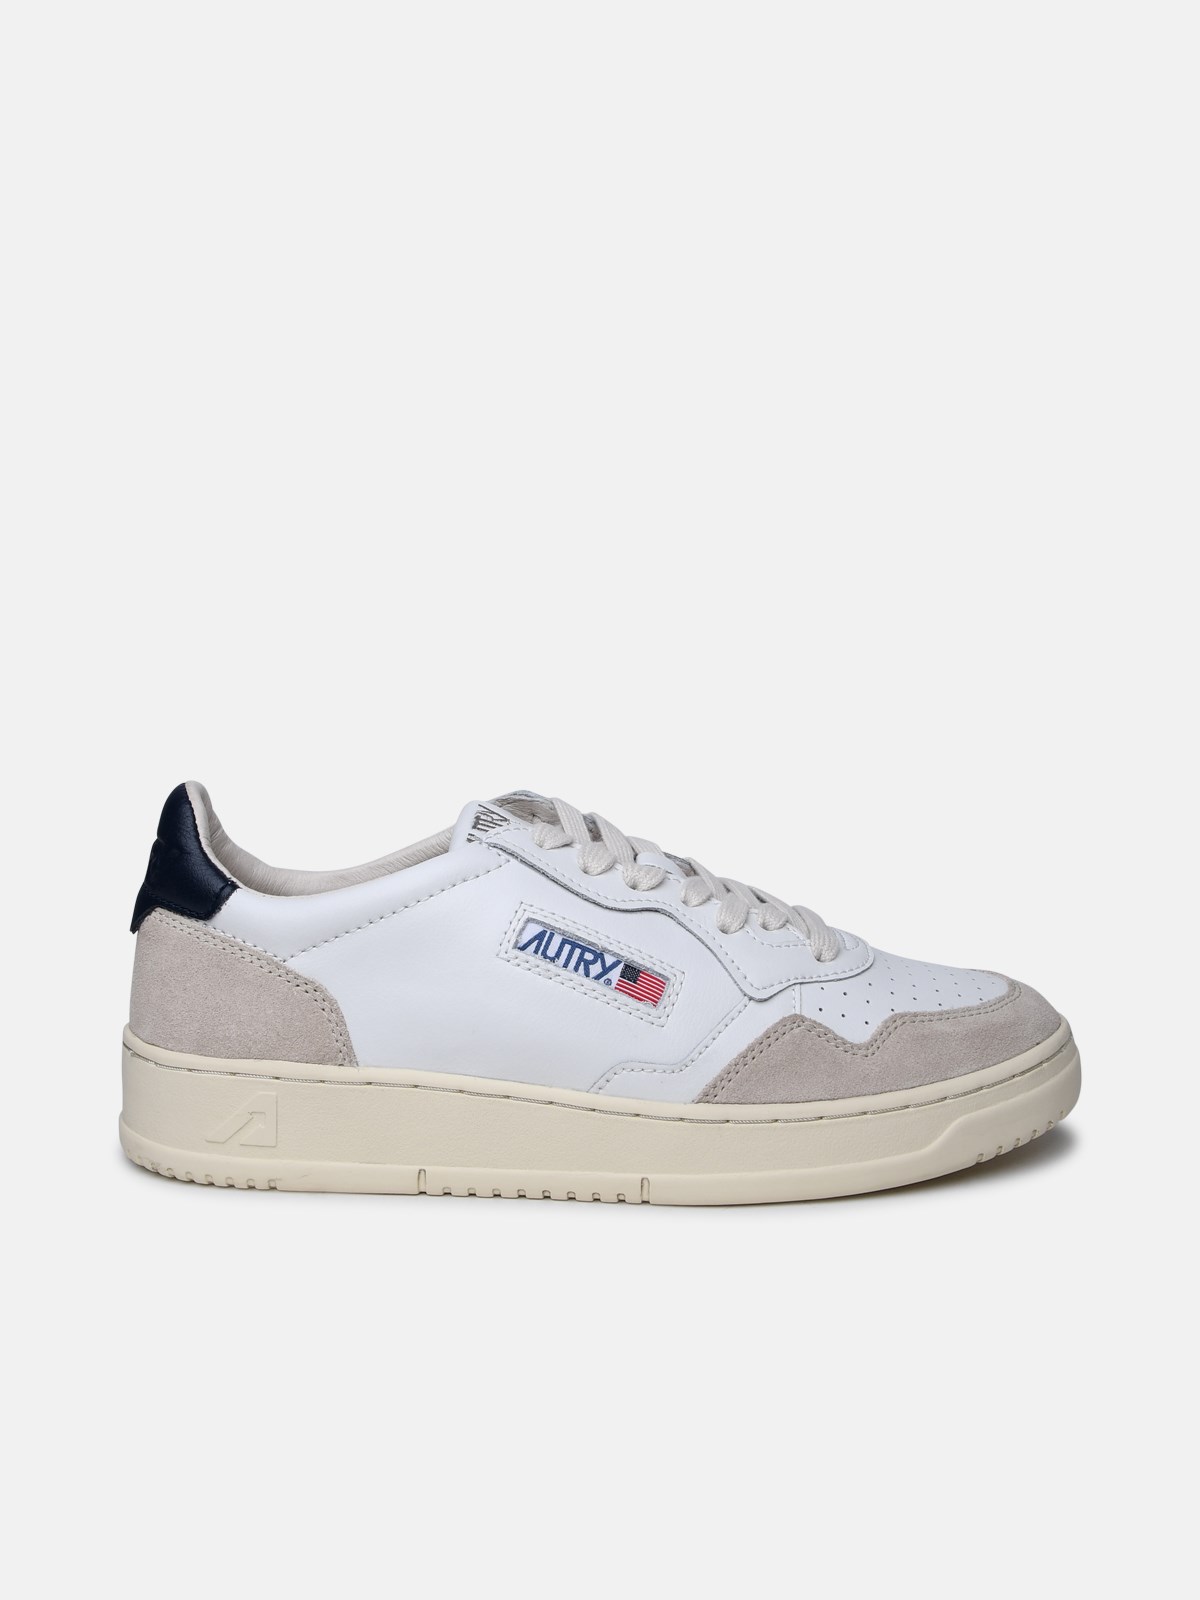 Autry Two-tone Leather Sneakers In White